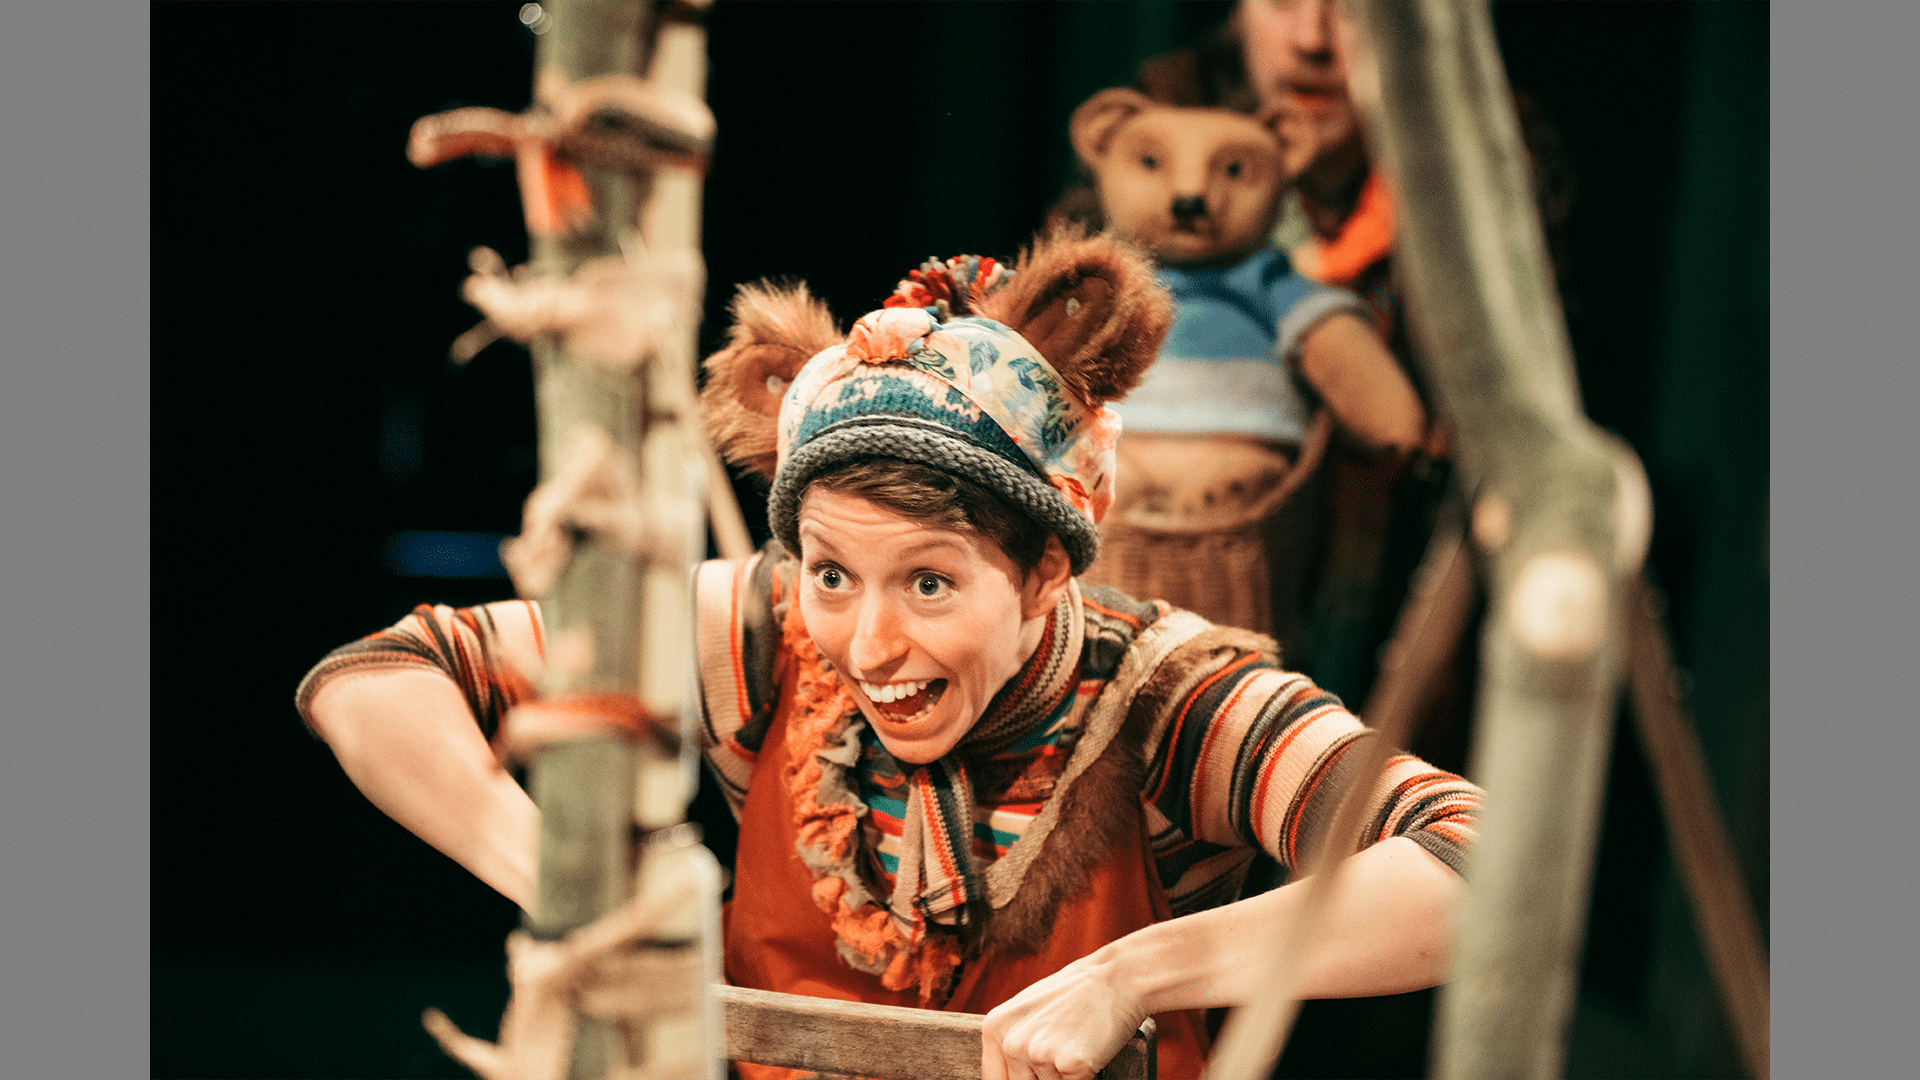 A performer stands on stage wearing a knitted hat with bear ears on, they look excited.